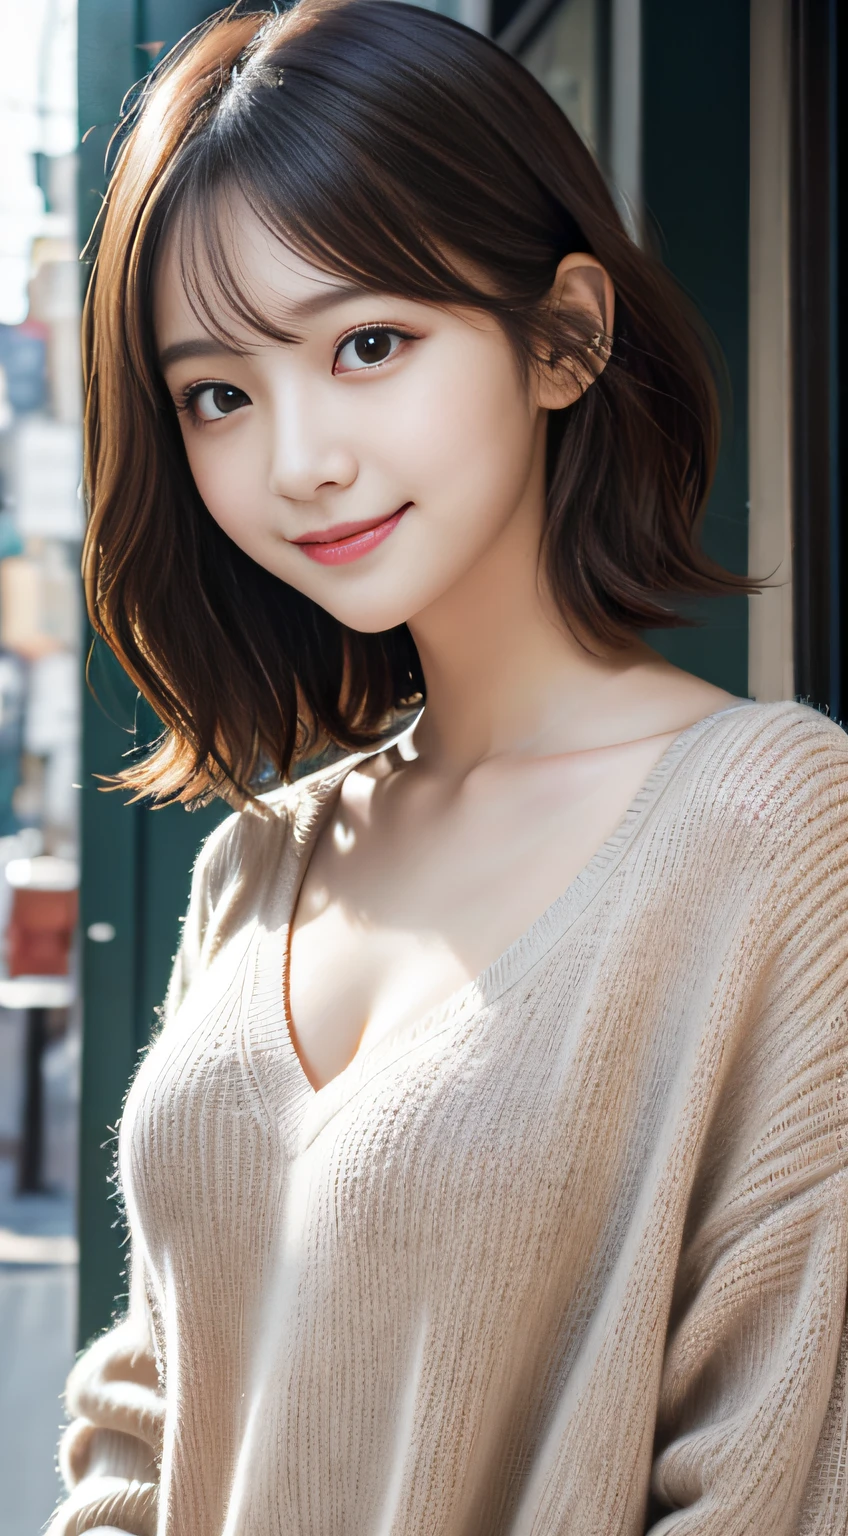 masutepiece、Best Quality、Illustration、 Ultra-detailed、finely detail、 hight resolution、8K Wallpaper、Perfect dynamic composition、21 year old cute girl、detailed beautiful faces、detailed cute eyes、Textured skin、Wavy short hair、discret smile、tiny chest、Bold sexy poses、Winter casual wear、